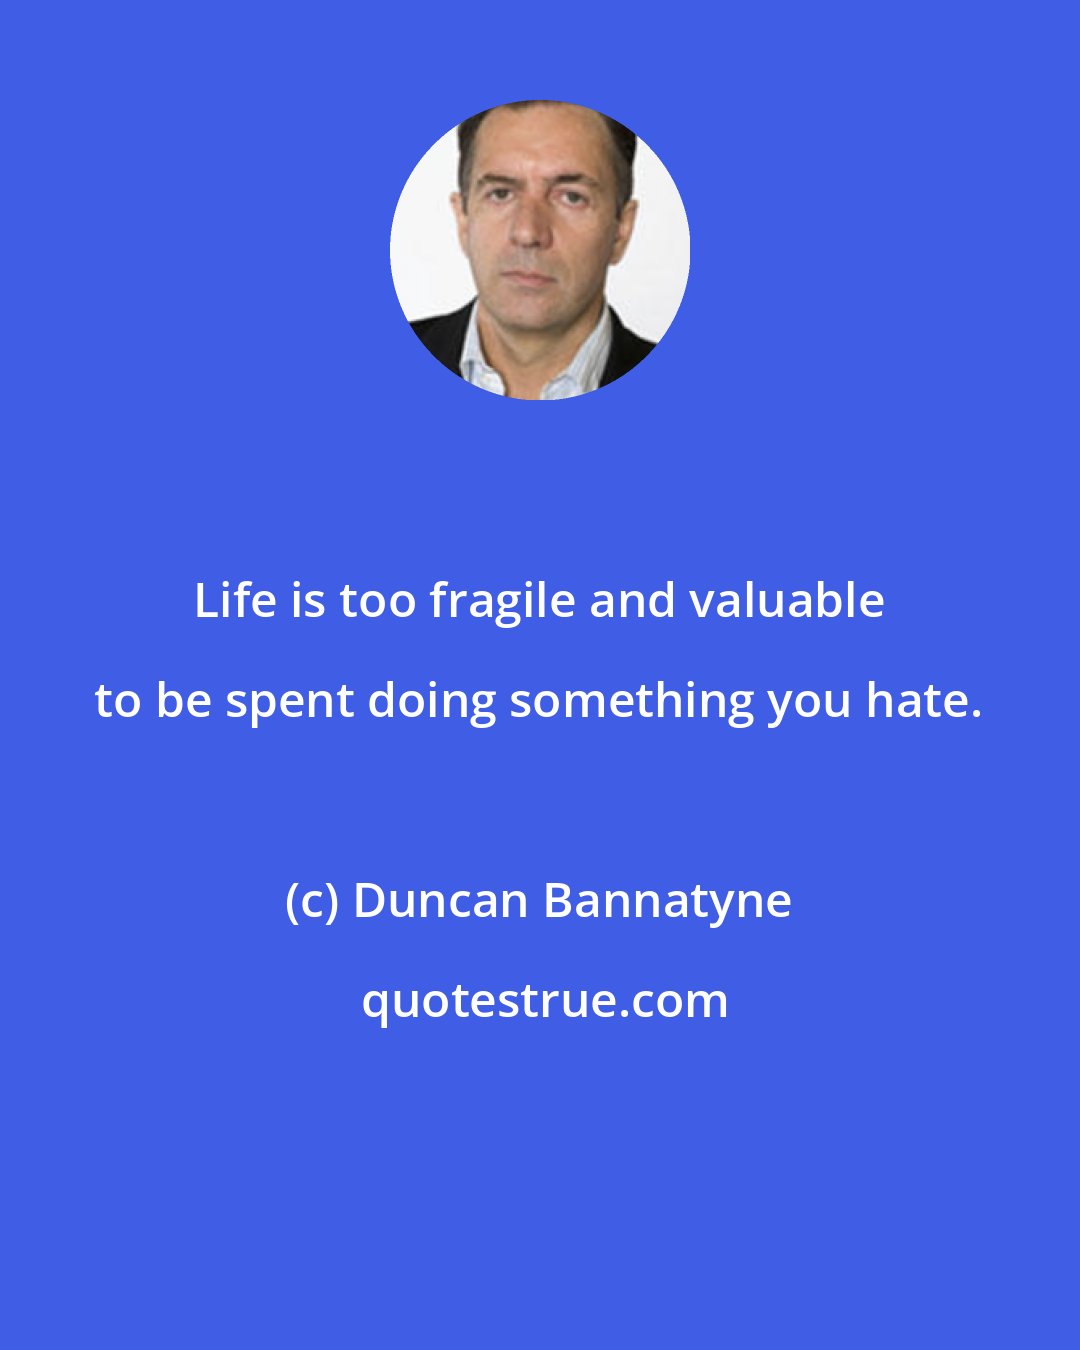 Duncan Bannatyne: Life is too fragile and valuable to be spent doing something you hate.